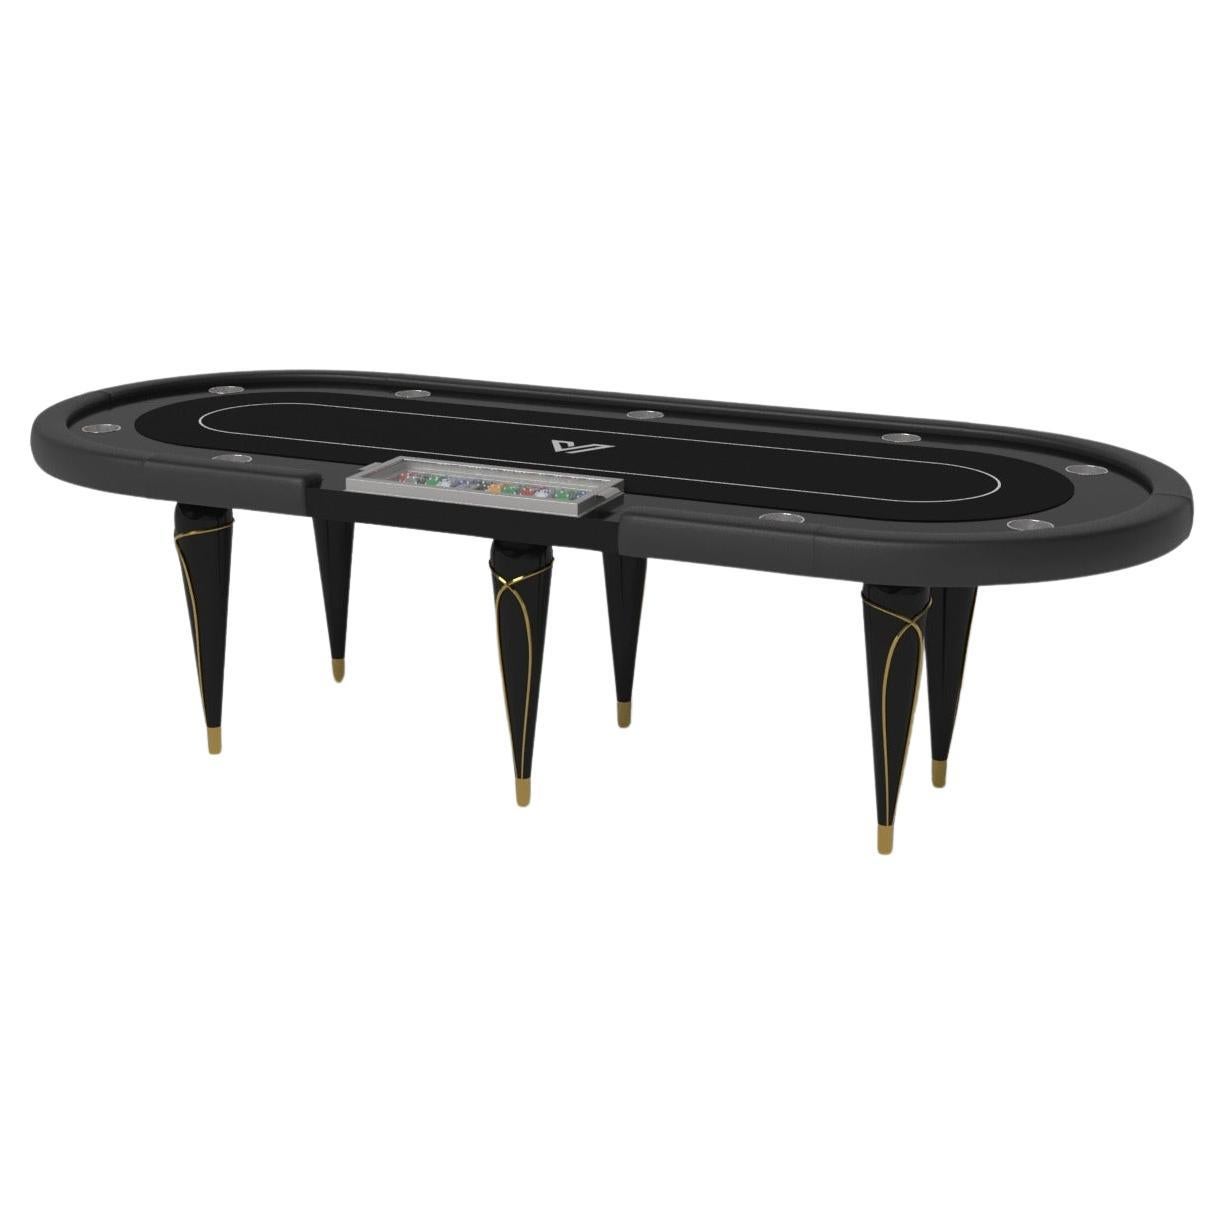 Elevate Customs Don Poker Tables /Solid Pantone Black Color in 8'8" -Made in USA For Sale